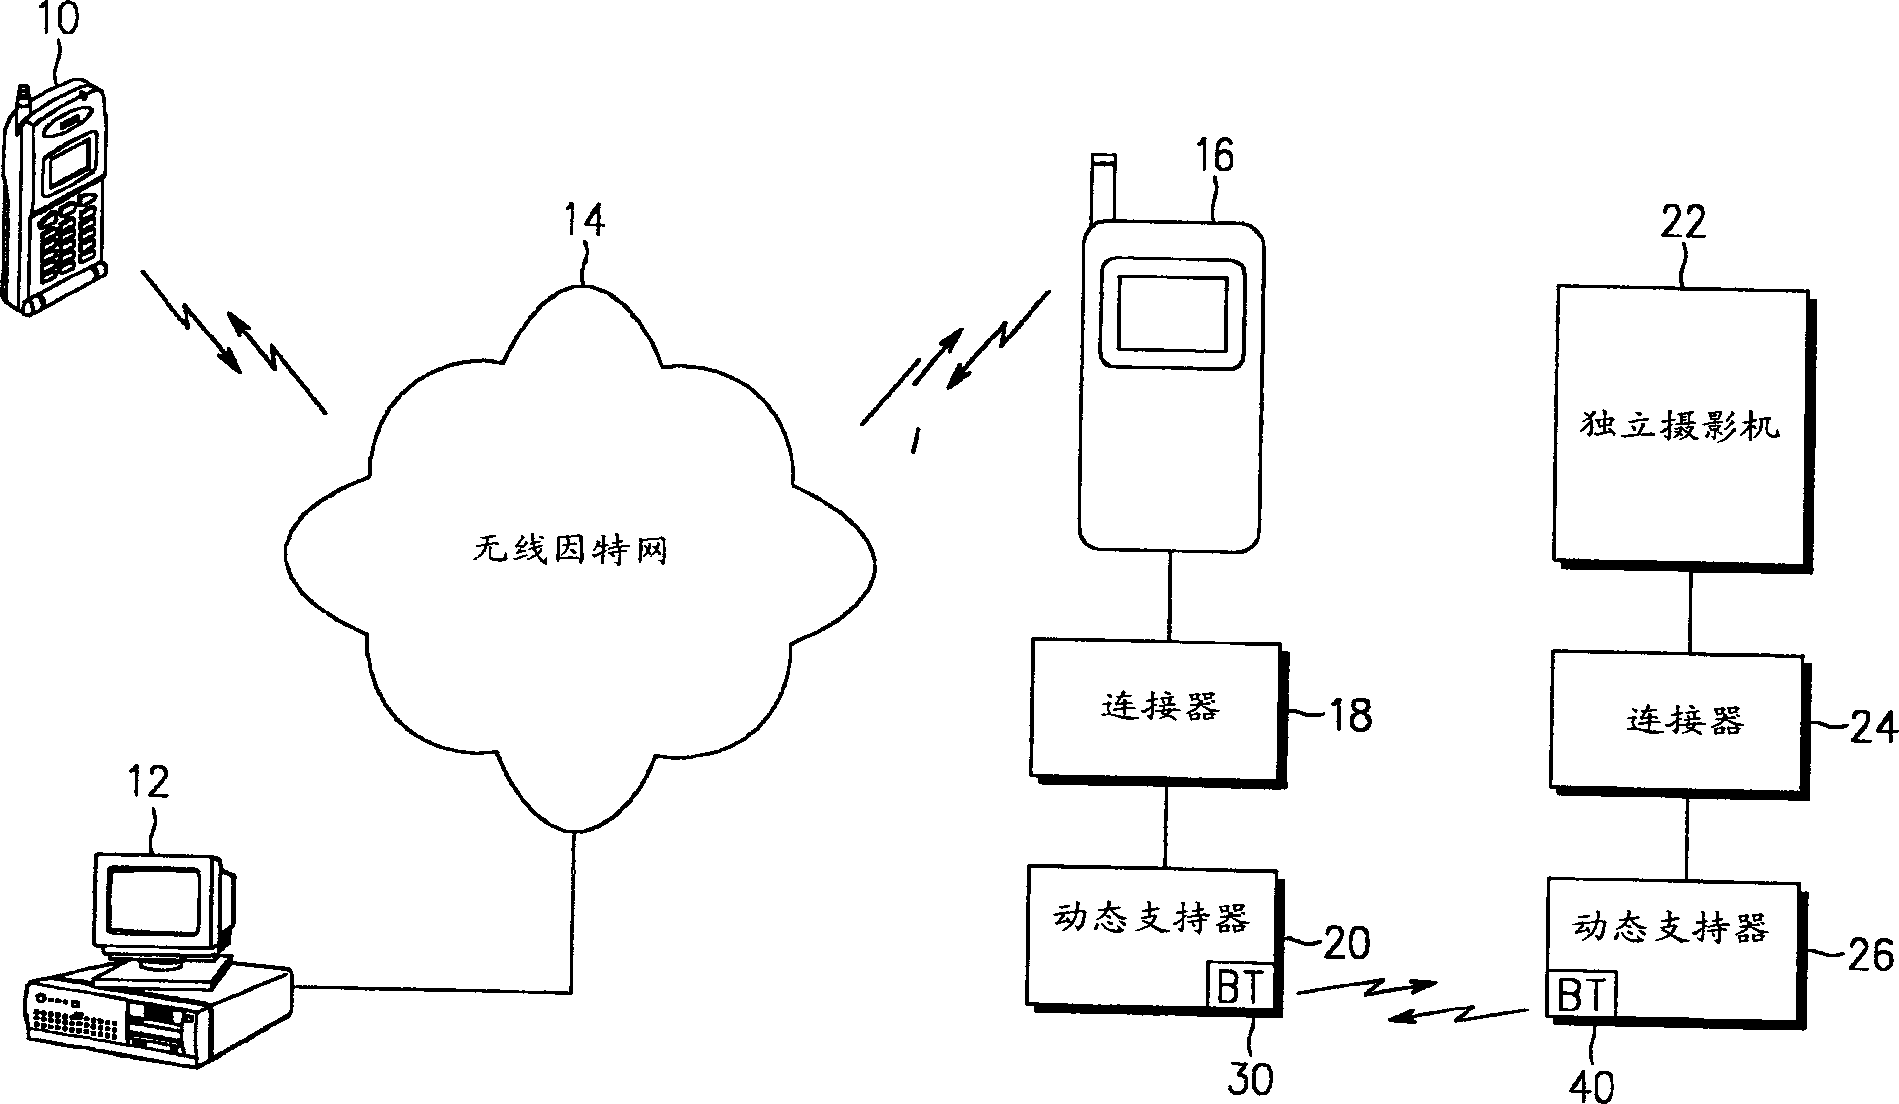 Remote monitor with mobile video telephone